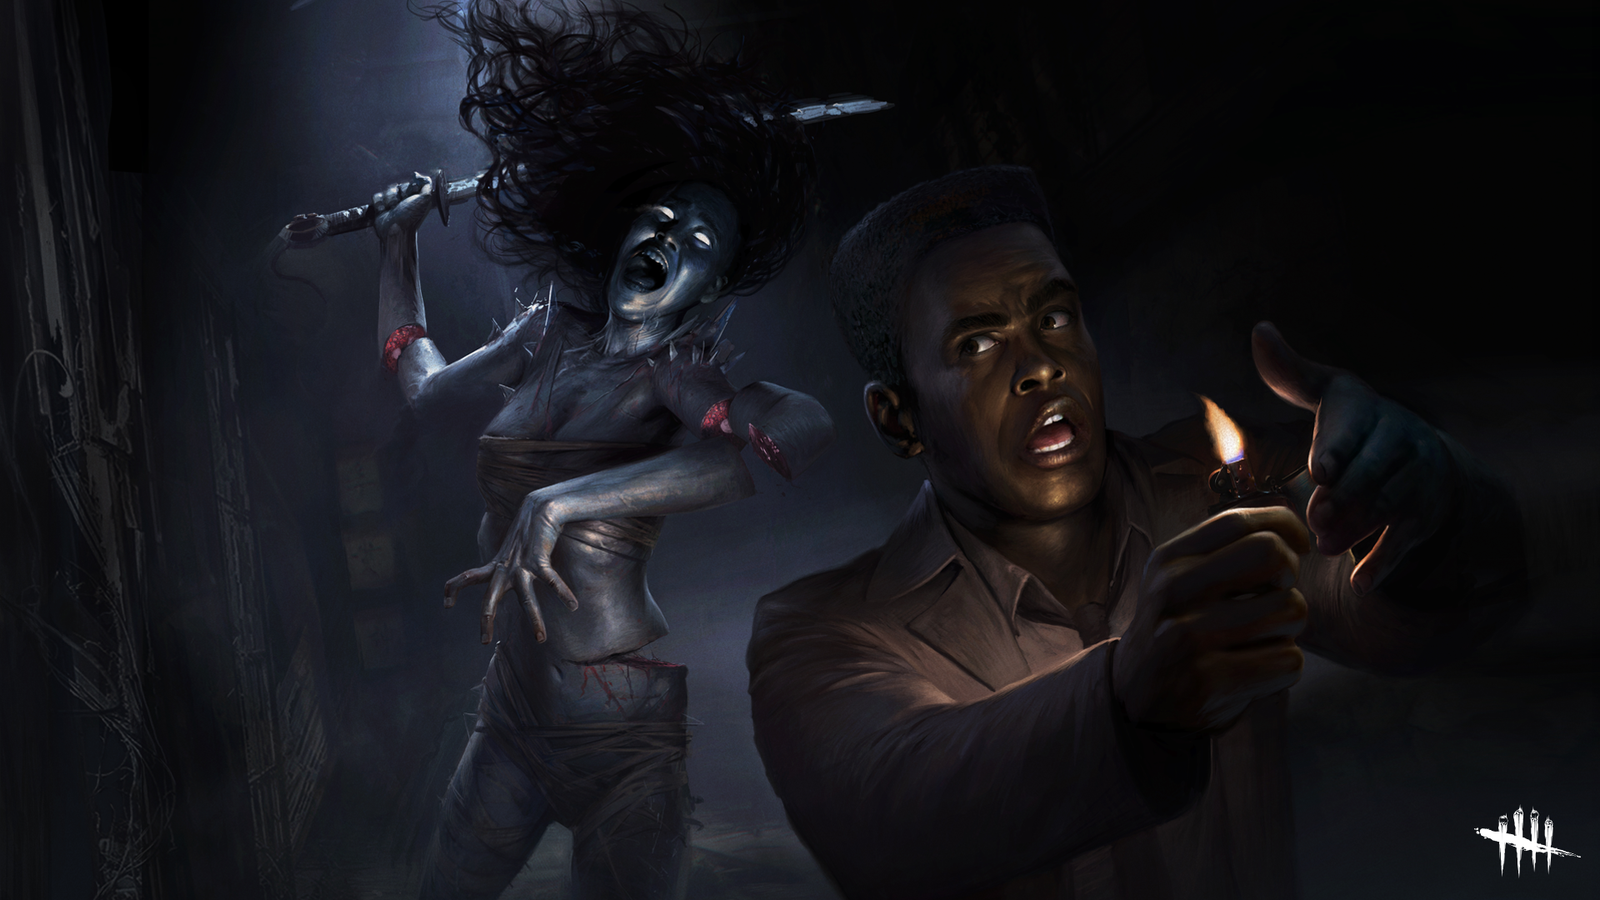 Image of the Spirit killing a survivor in Dead By Daylight.